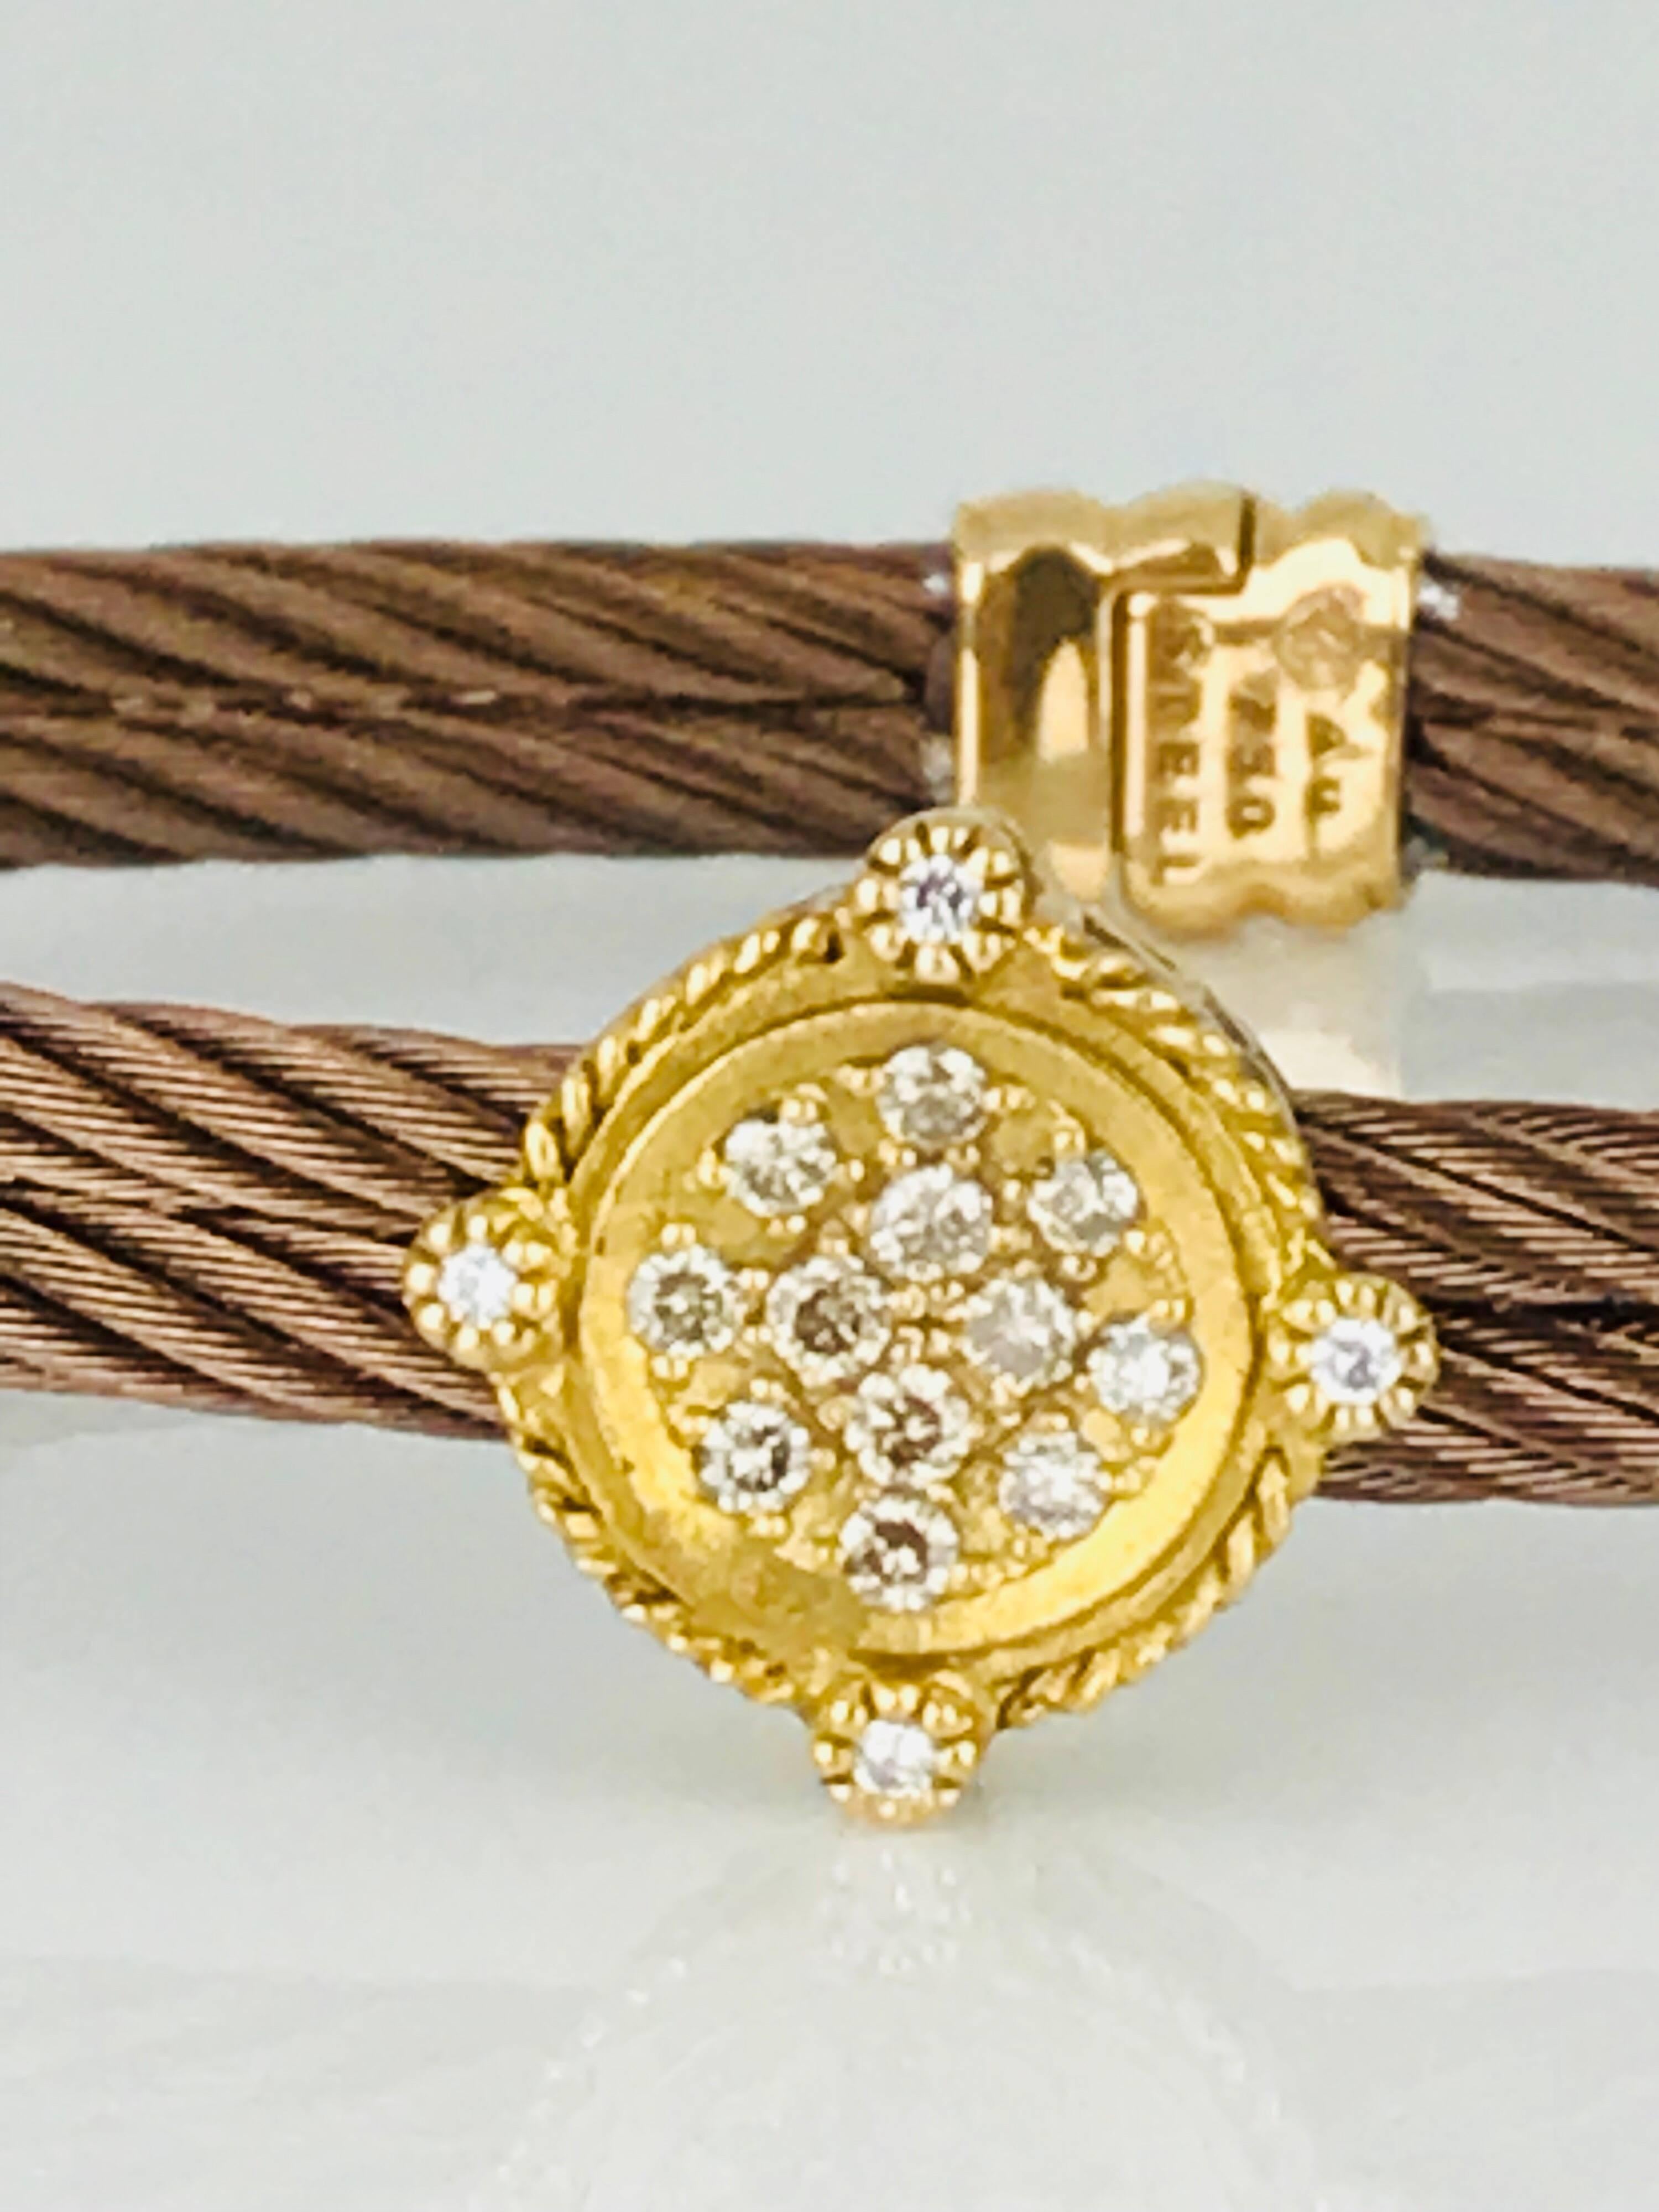 Phillipe Charriol designer, 18 Karat Yellow gold and stainless steel cable diamond bracelet. The stainless is a rich-copper color and the yellow gold is accented with diamonds. 
A total of (16) round diamond measuring 1.6 millimeters. The total